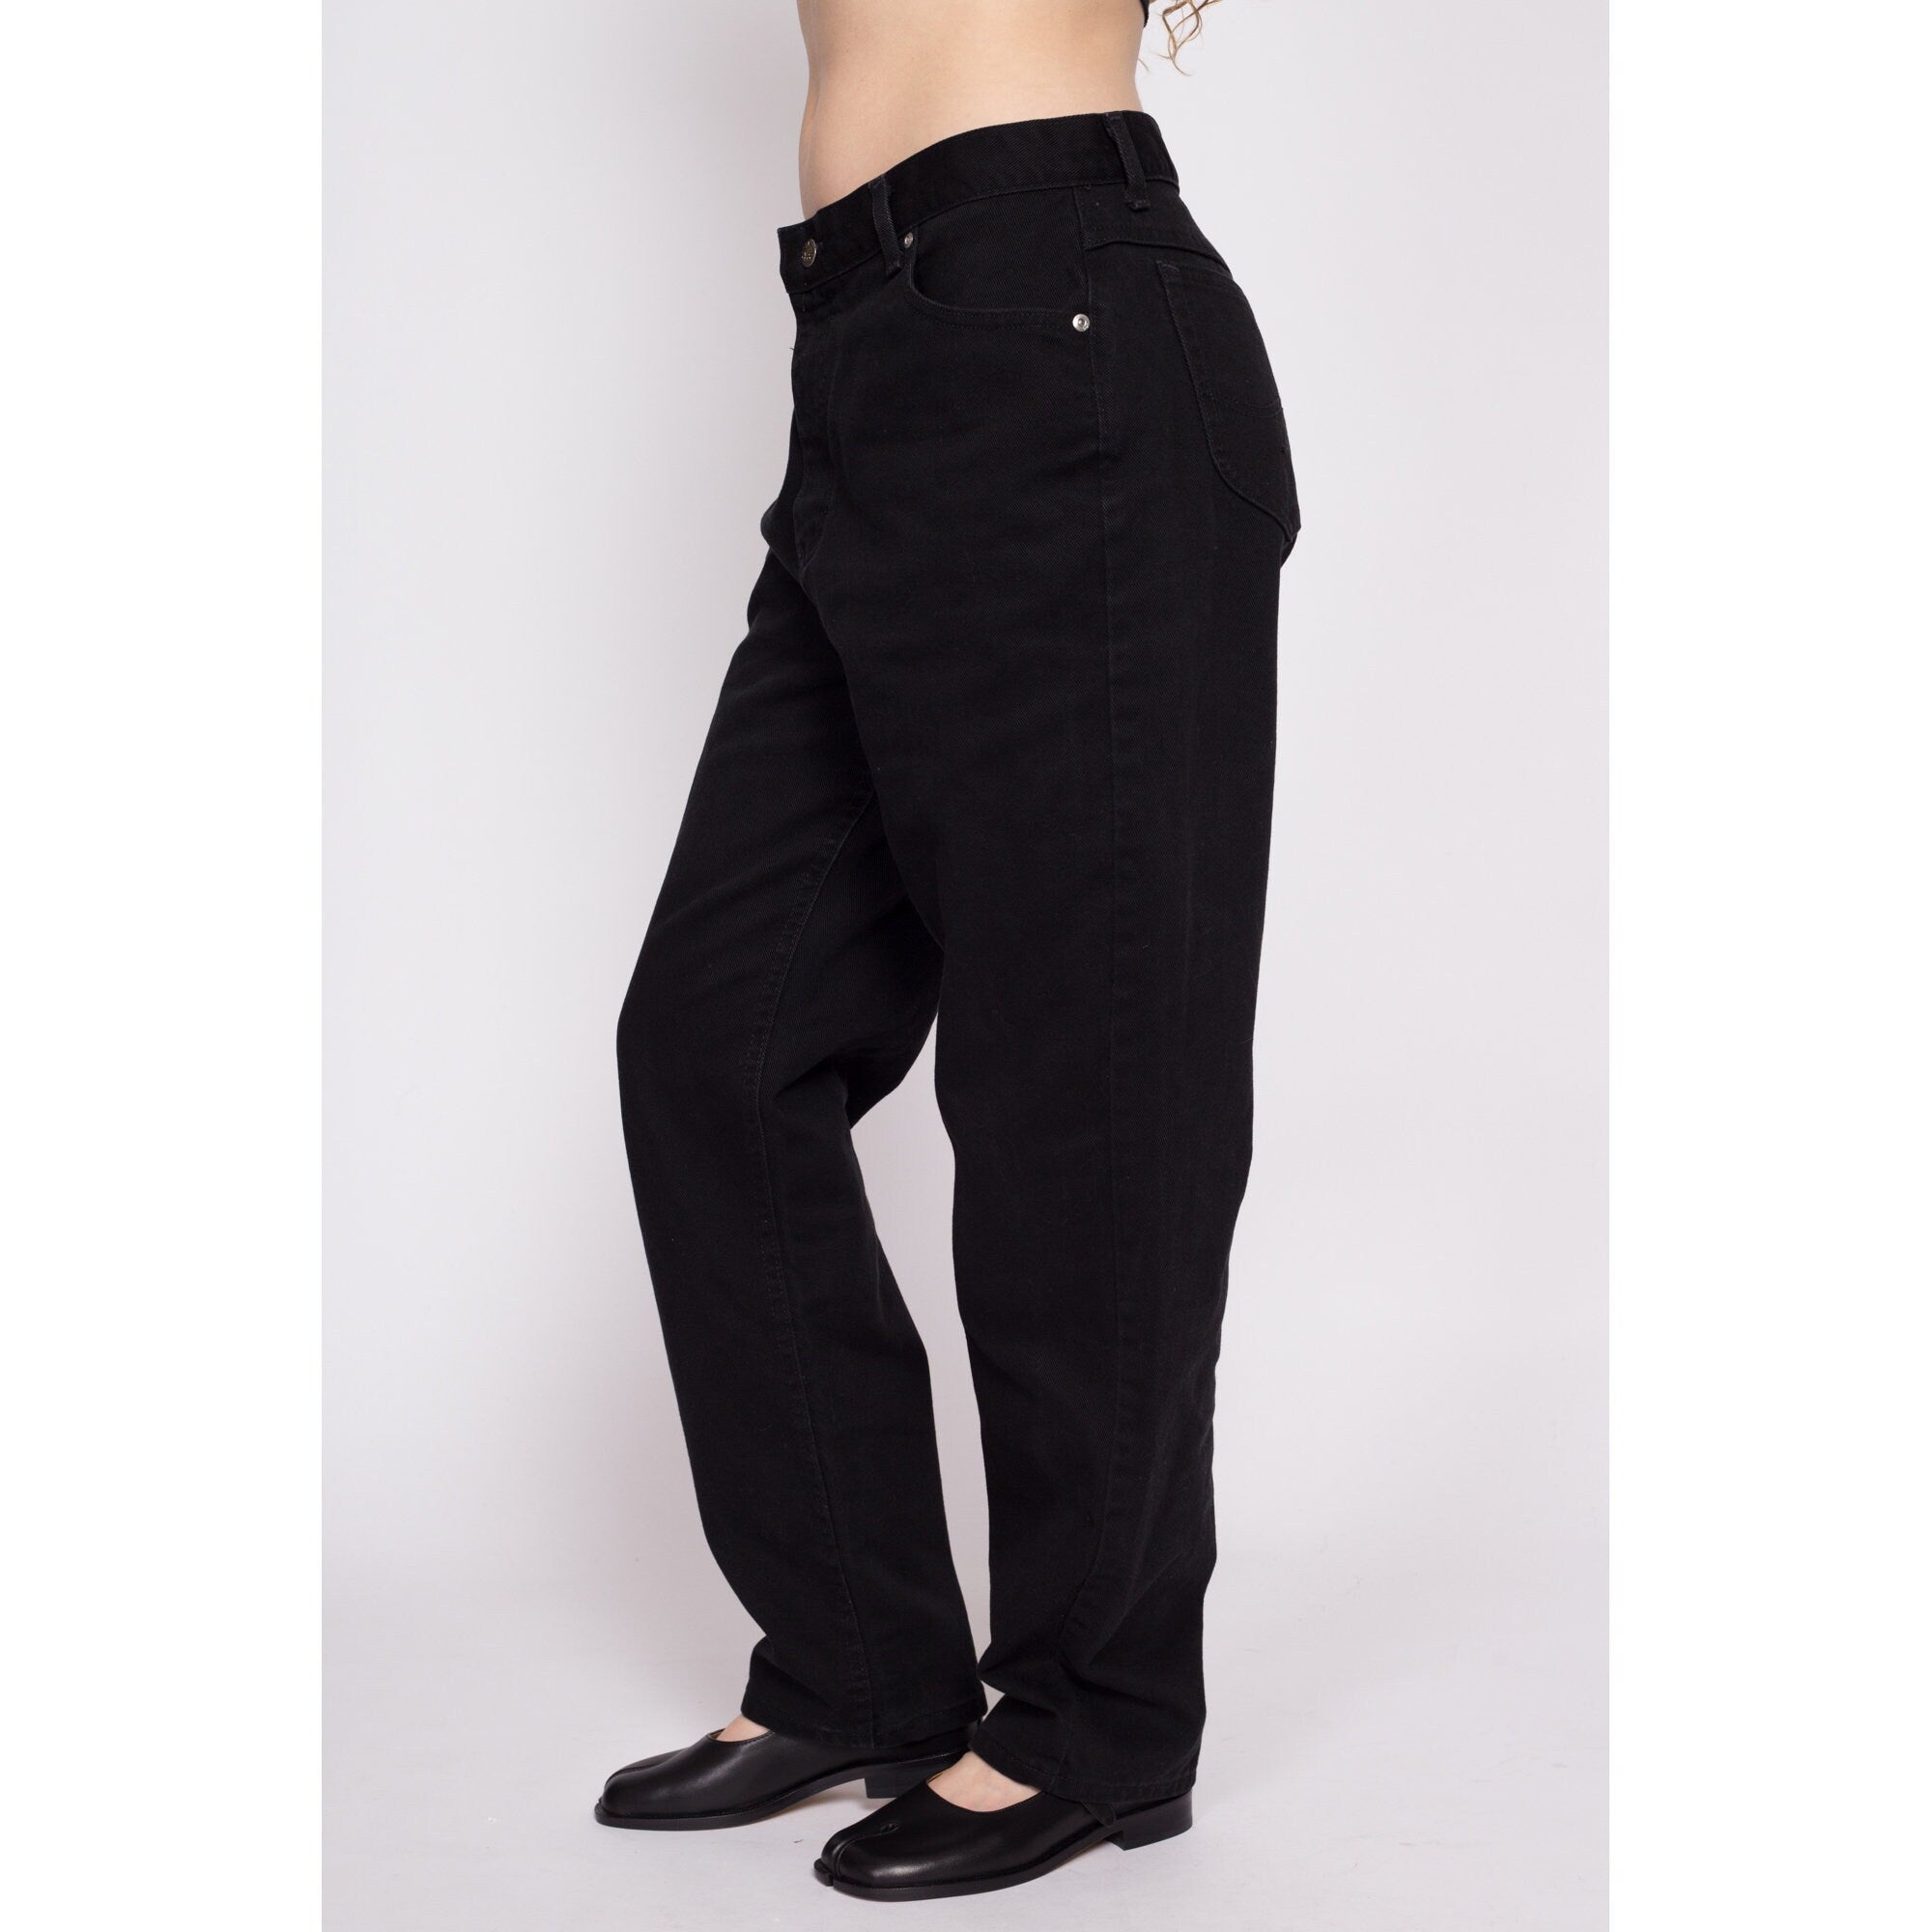 90s Lee Black High Waisted Jeans - Large, 32.5